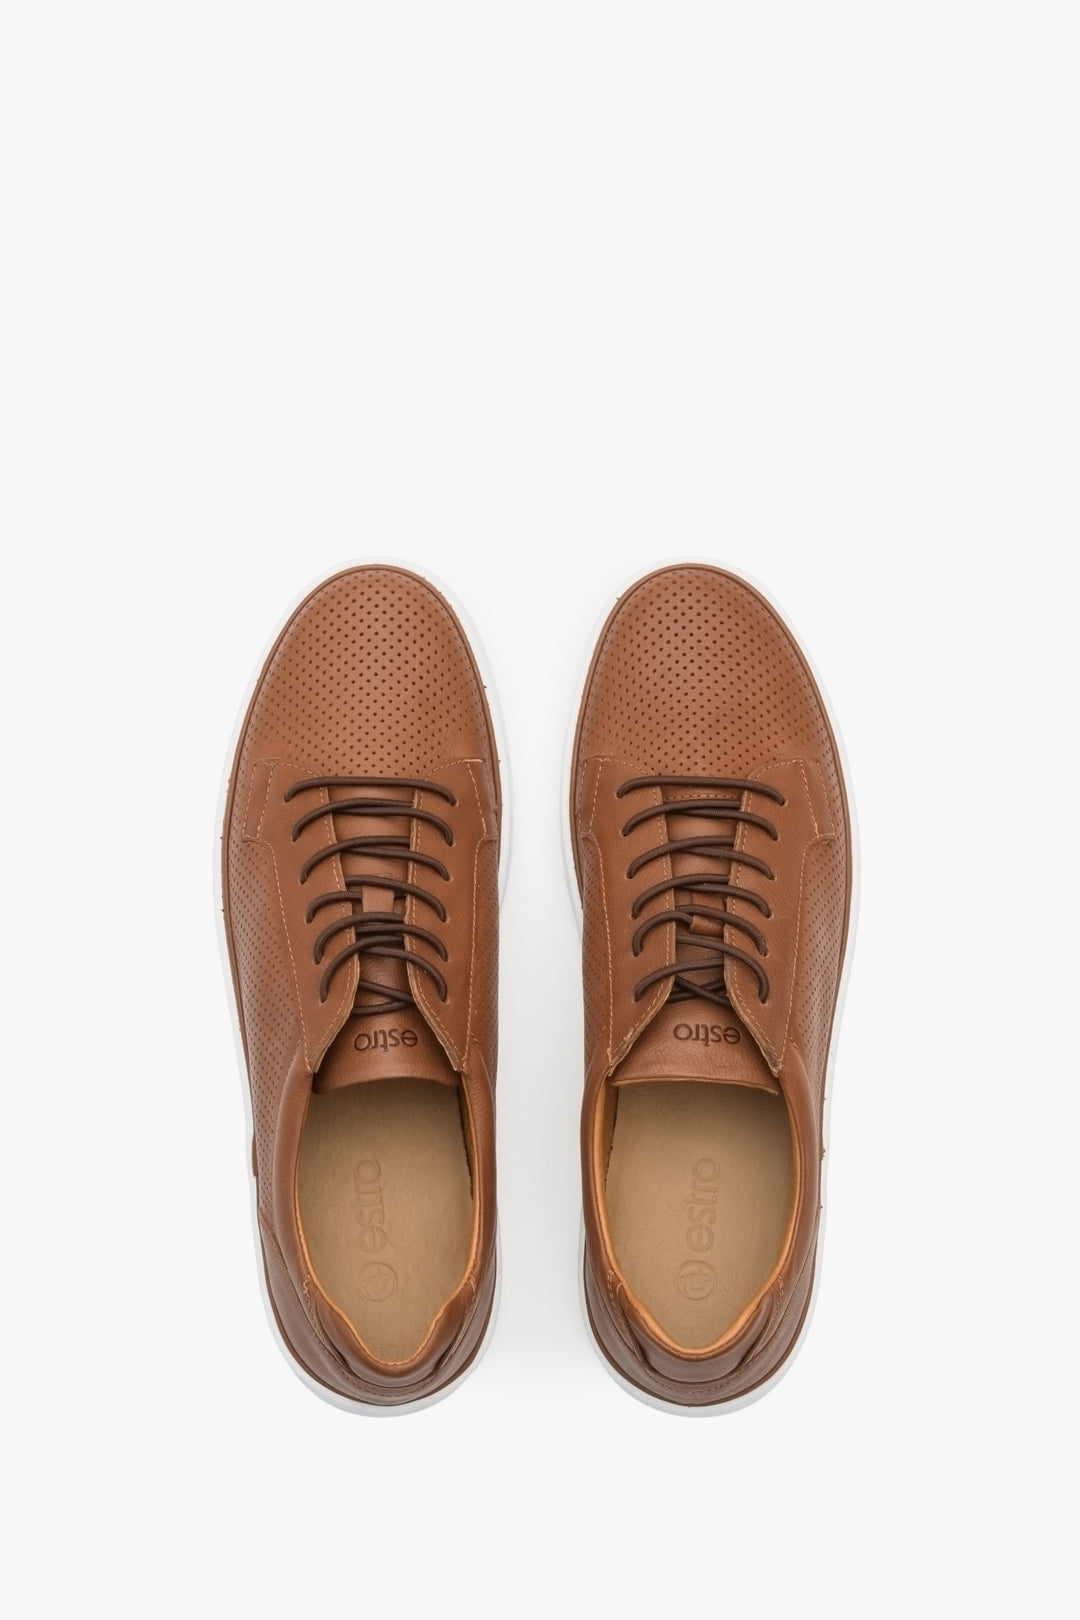 Men's leather sneakers for summer in brown color with perforation - presentation of shoes from above.